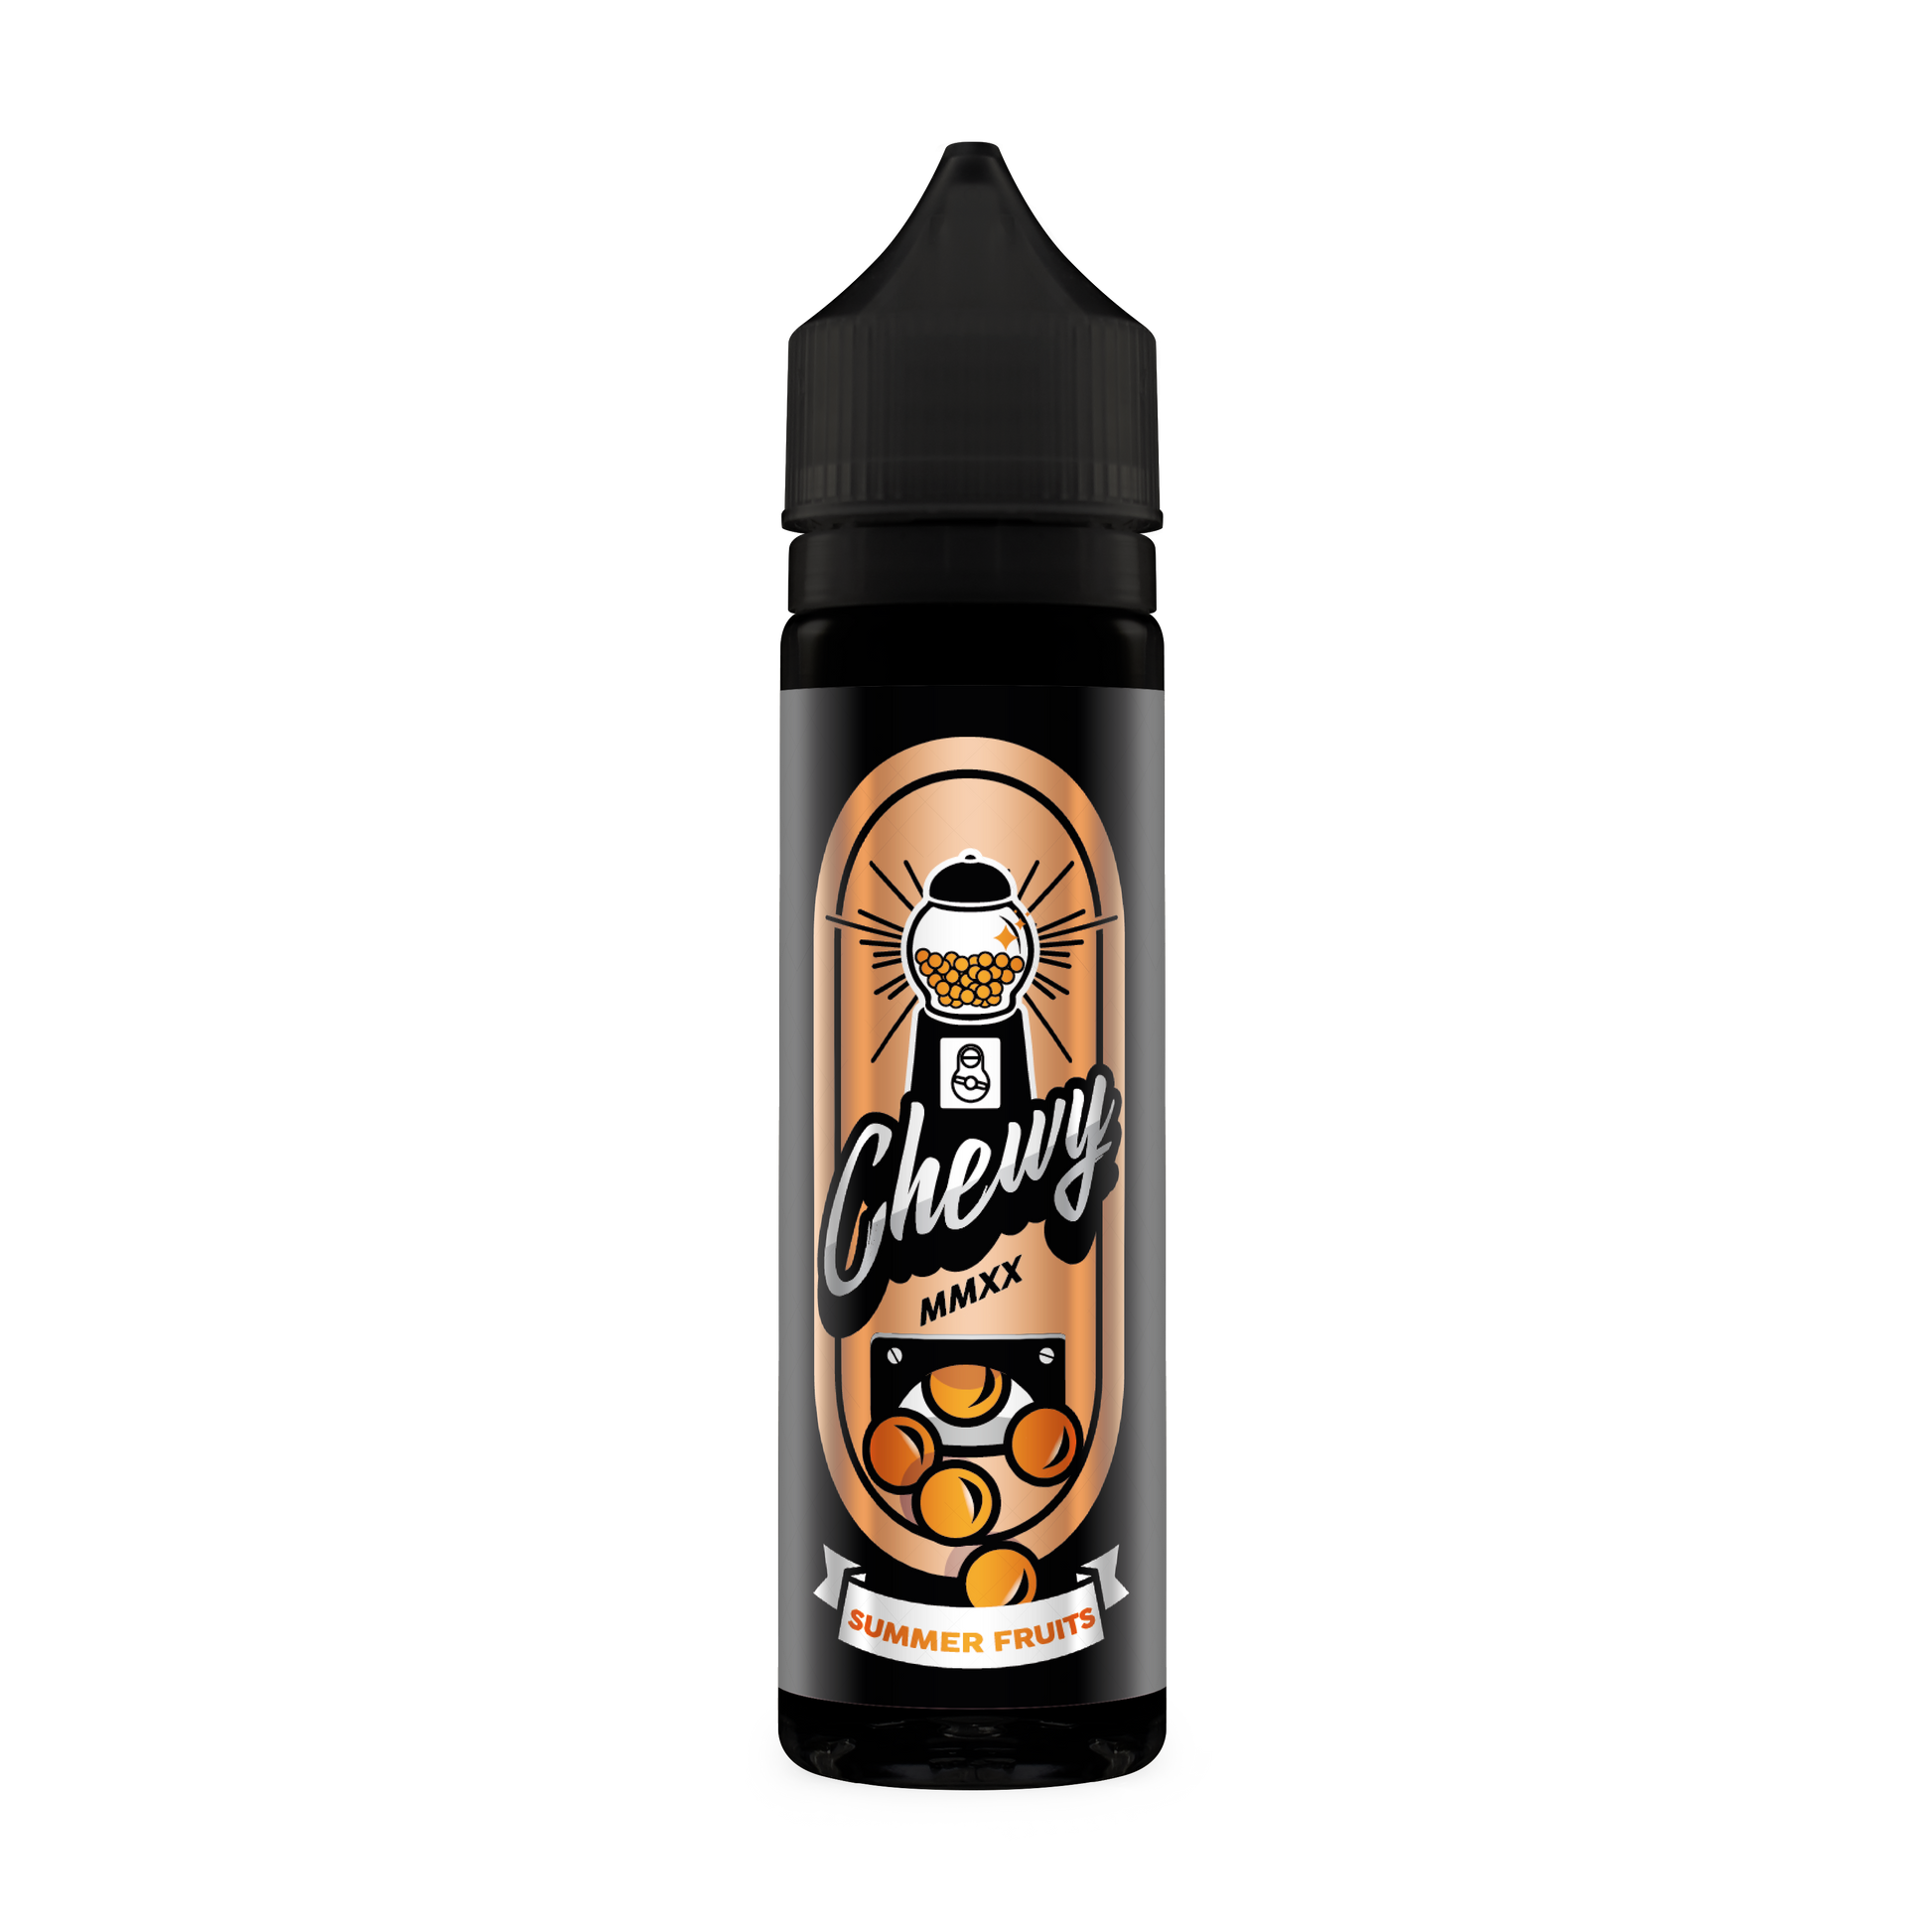 Chewy - Summer Fruits Bubblegum 50ml - The Ace Of Vapez